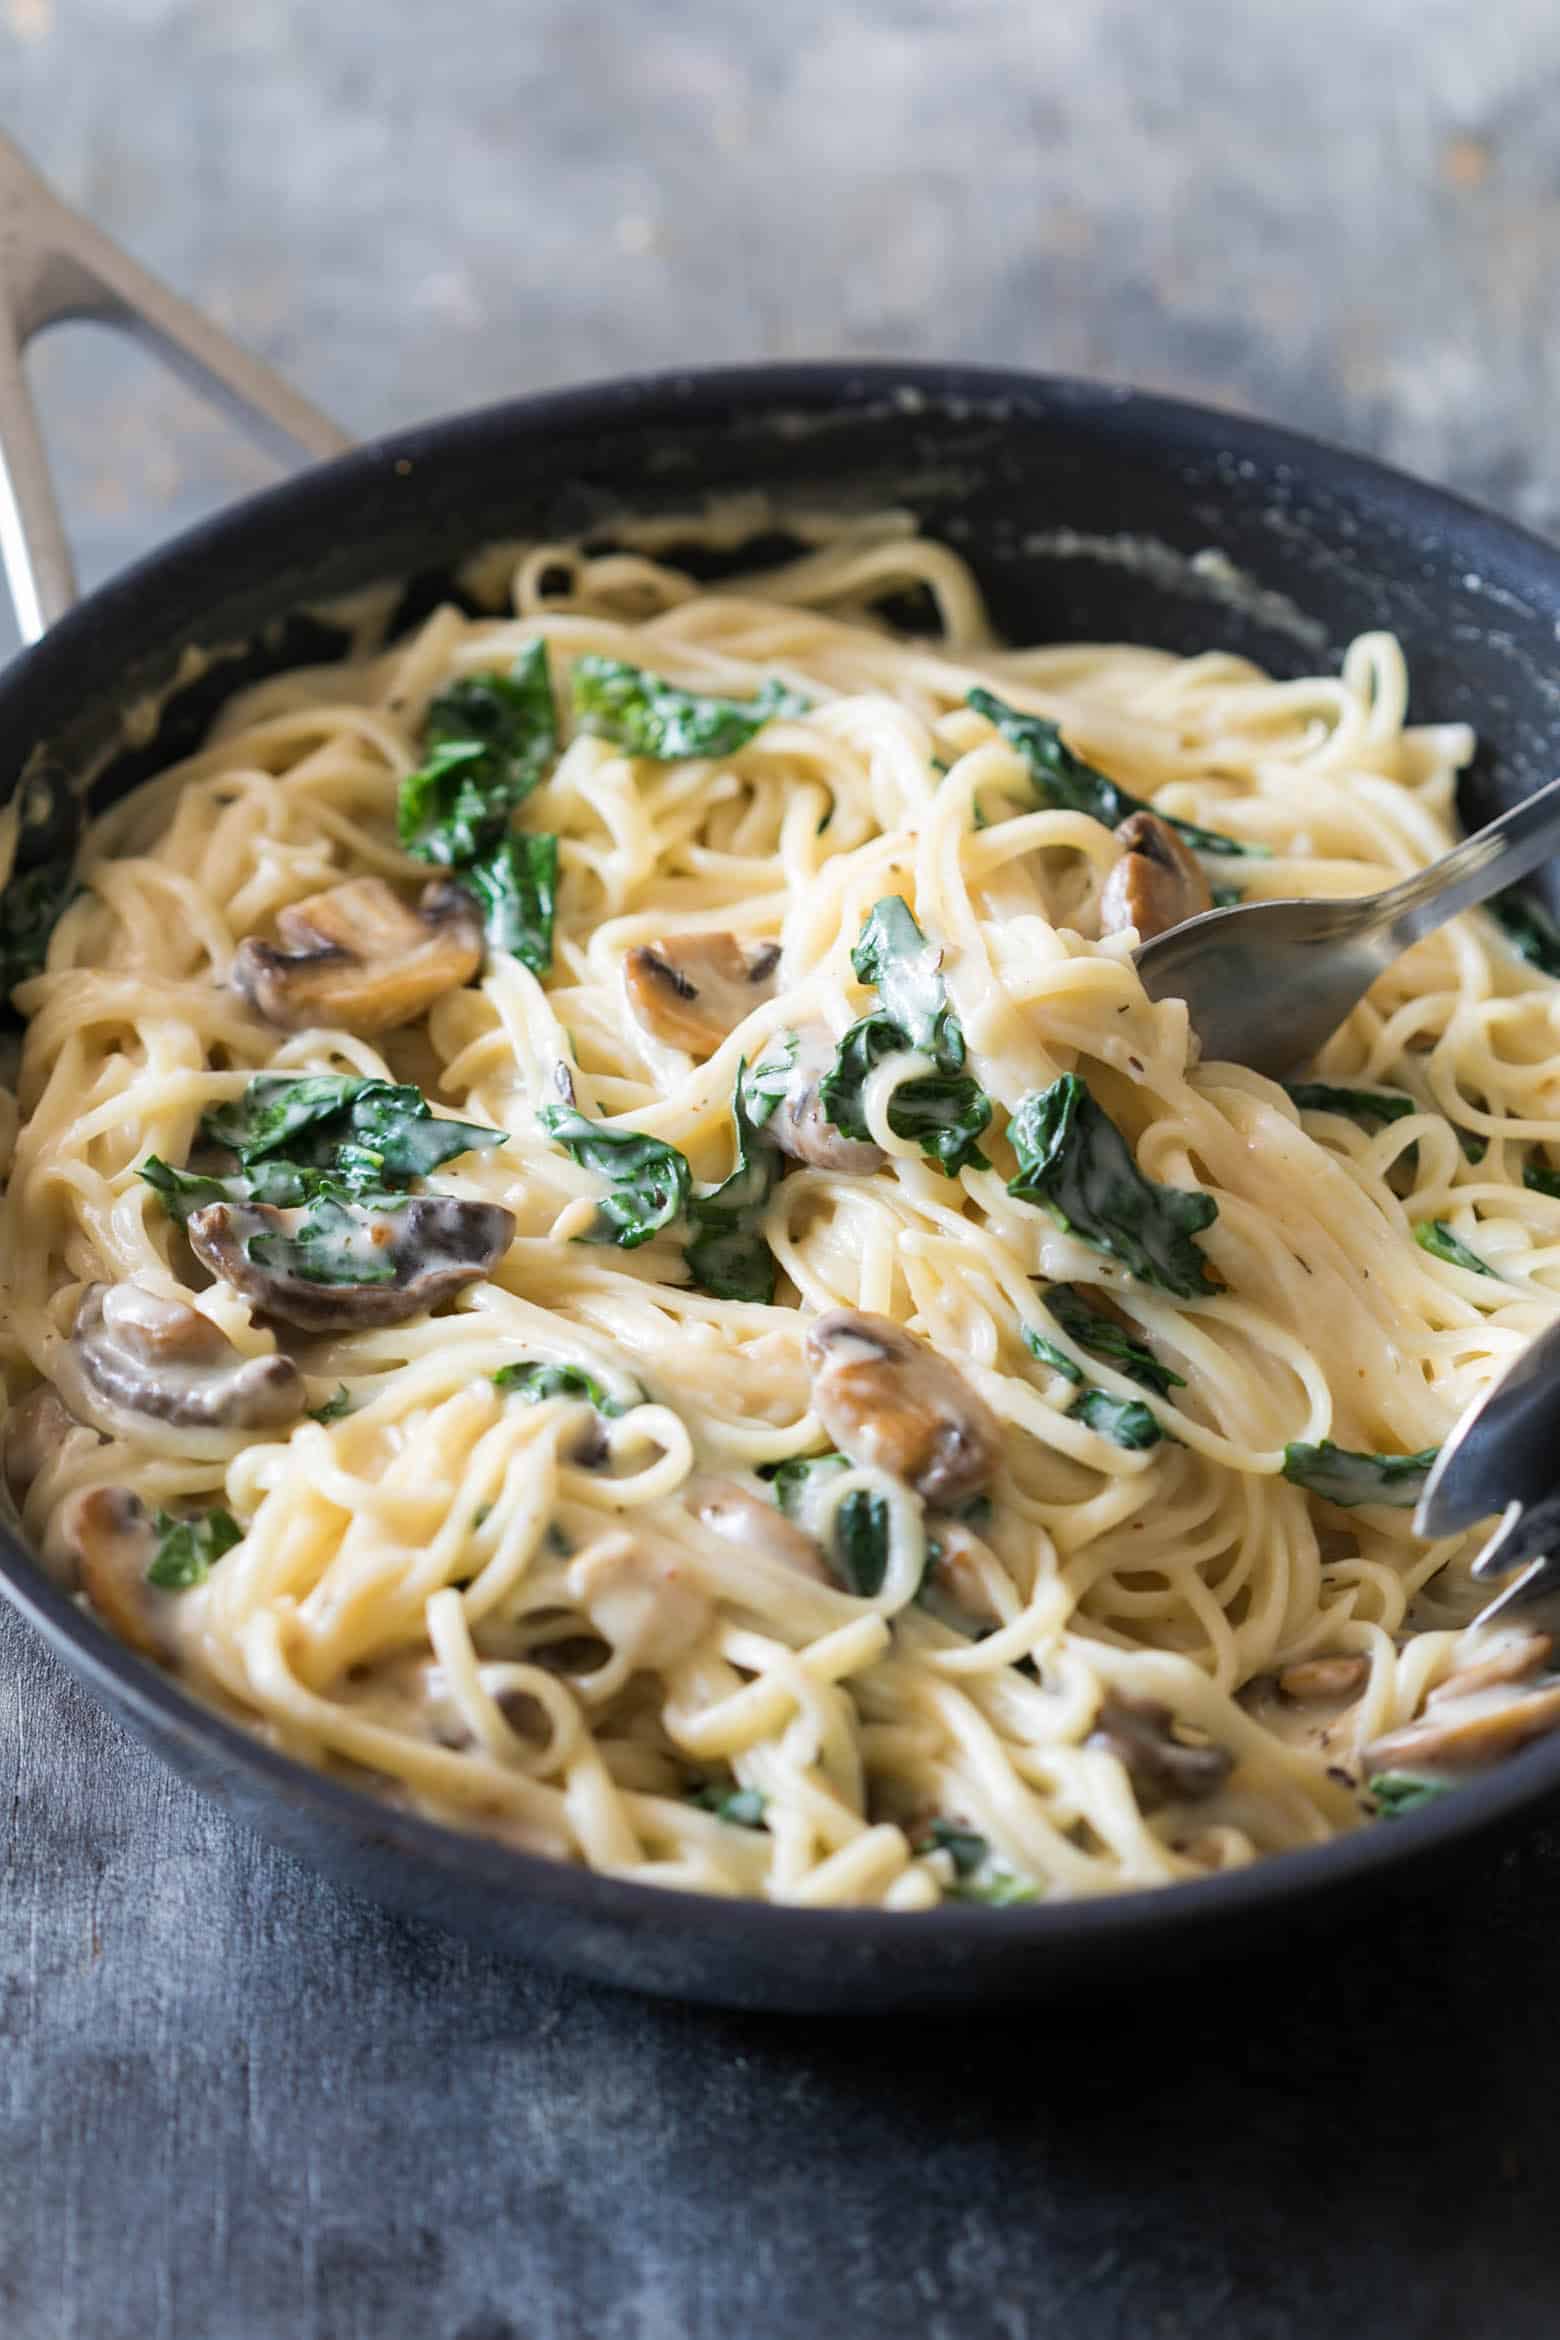 Creamy lemon mushroom kale linguine pasta is vegetarian, ready in 30 minutes with the best healthy alfredo style white sauce you'll make!